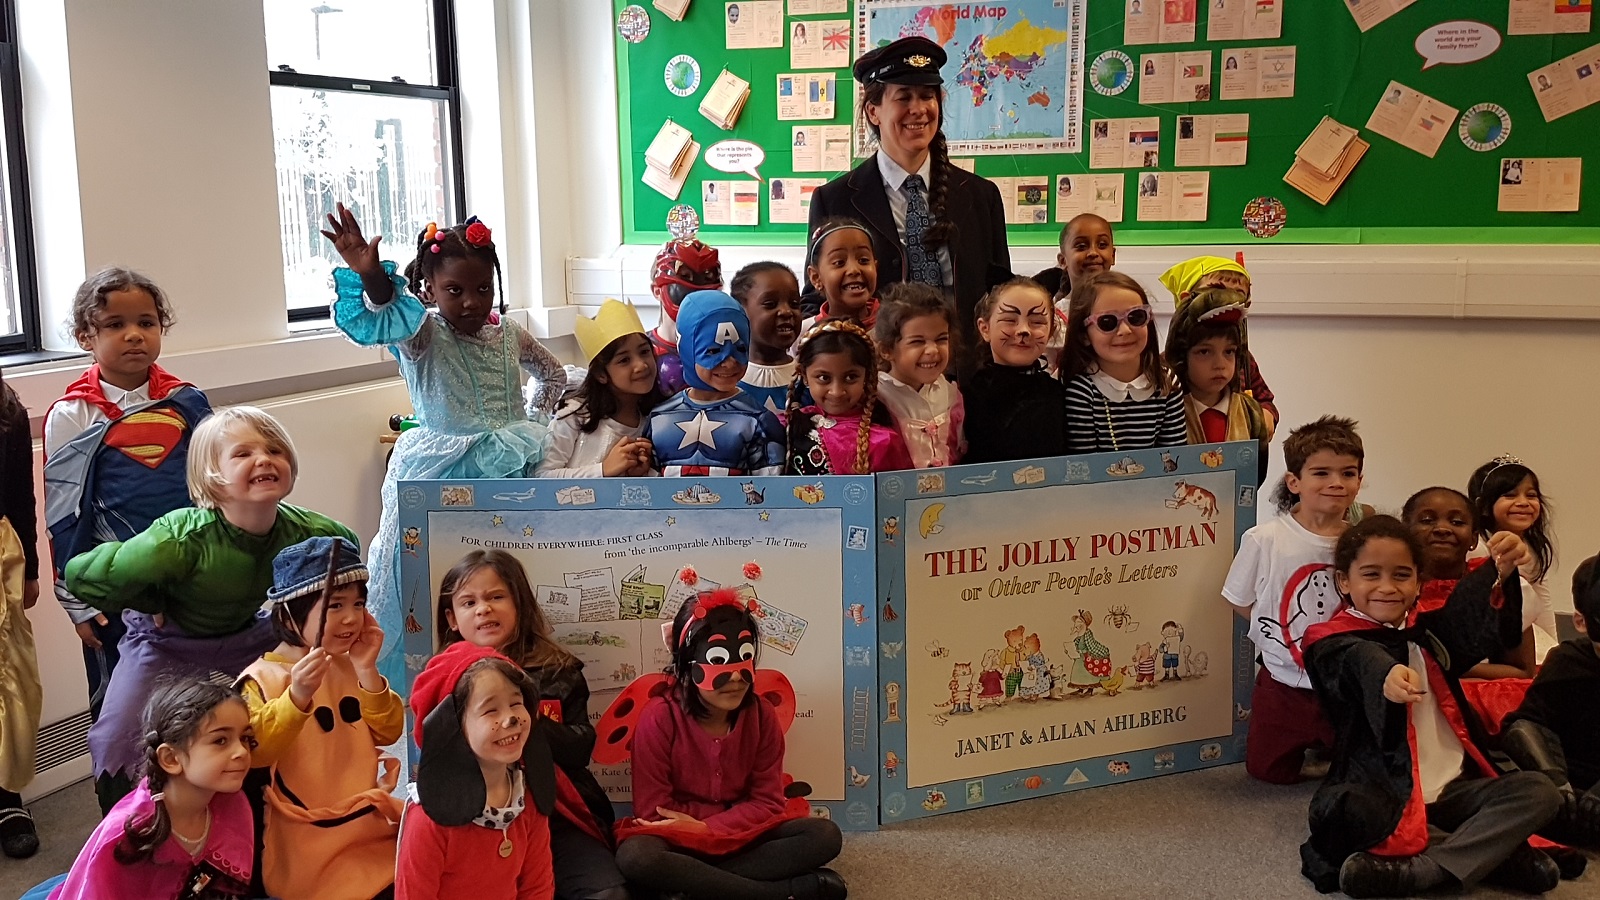 The Jolly Postman Learning Programme